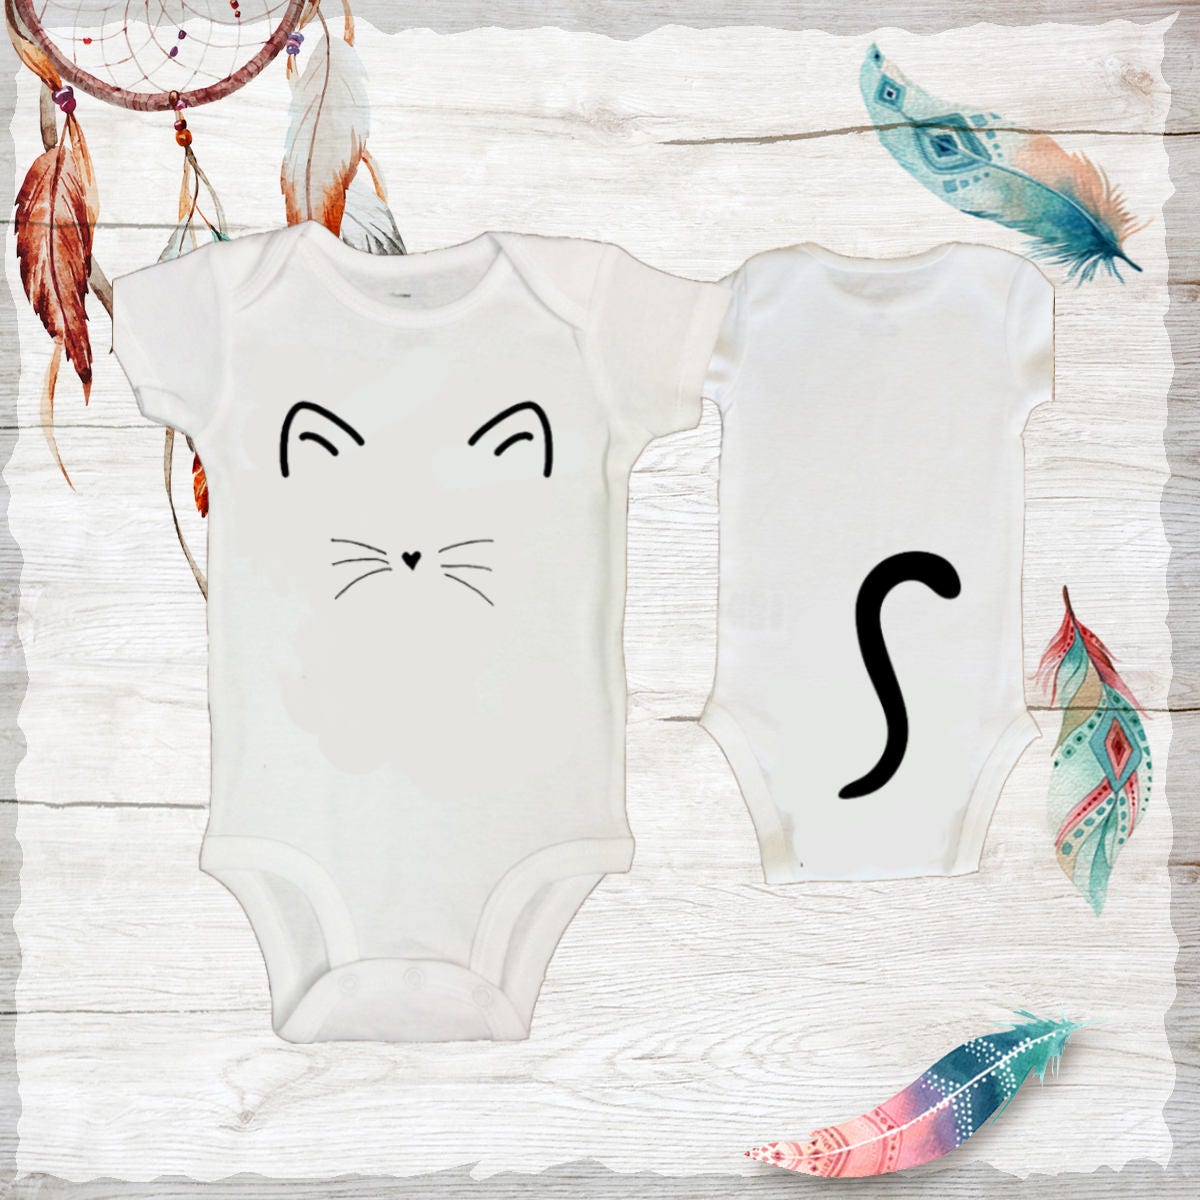 Adorable Kitty Cat Face and Tail Bottom Onesies Baby